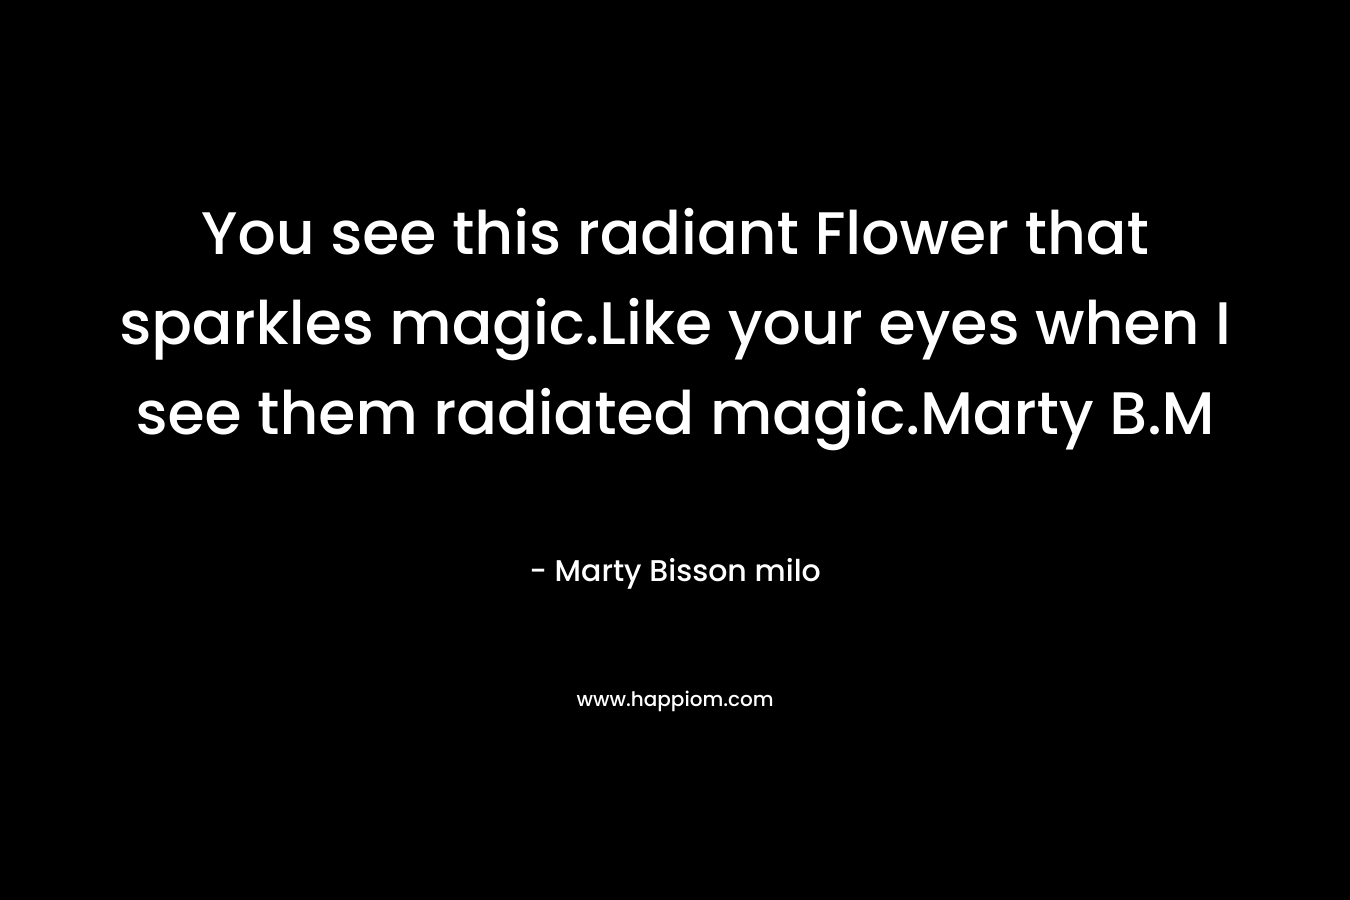 You see this radiant Flower that sparkles magic.Like your eyes when I see them radiated magic.Marty B.M – Marty Bisson milo